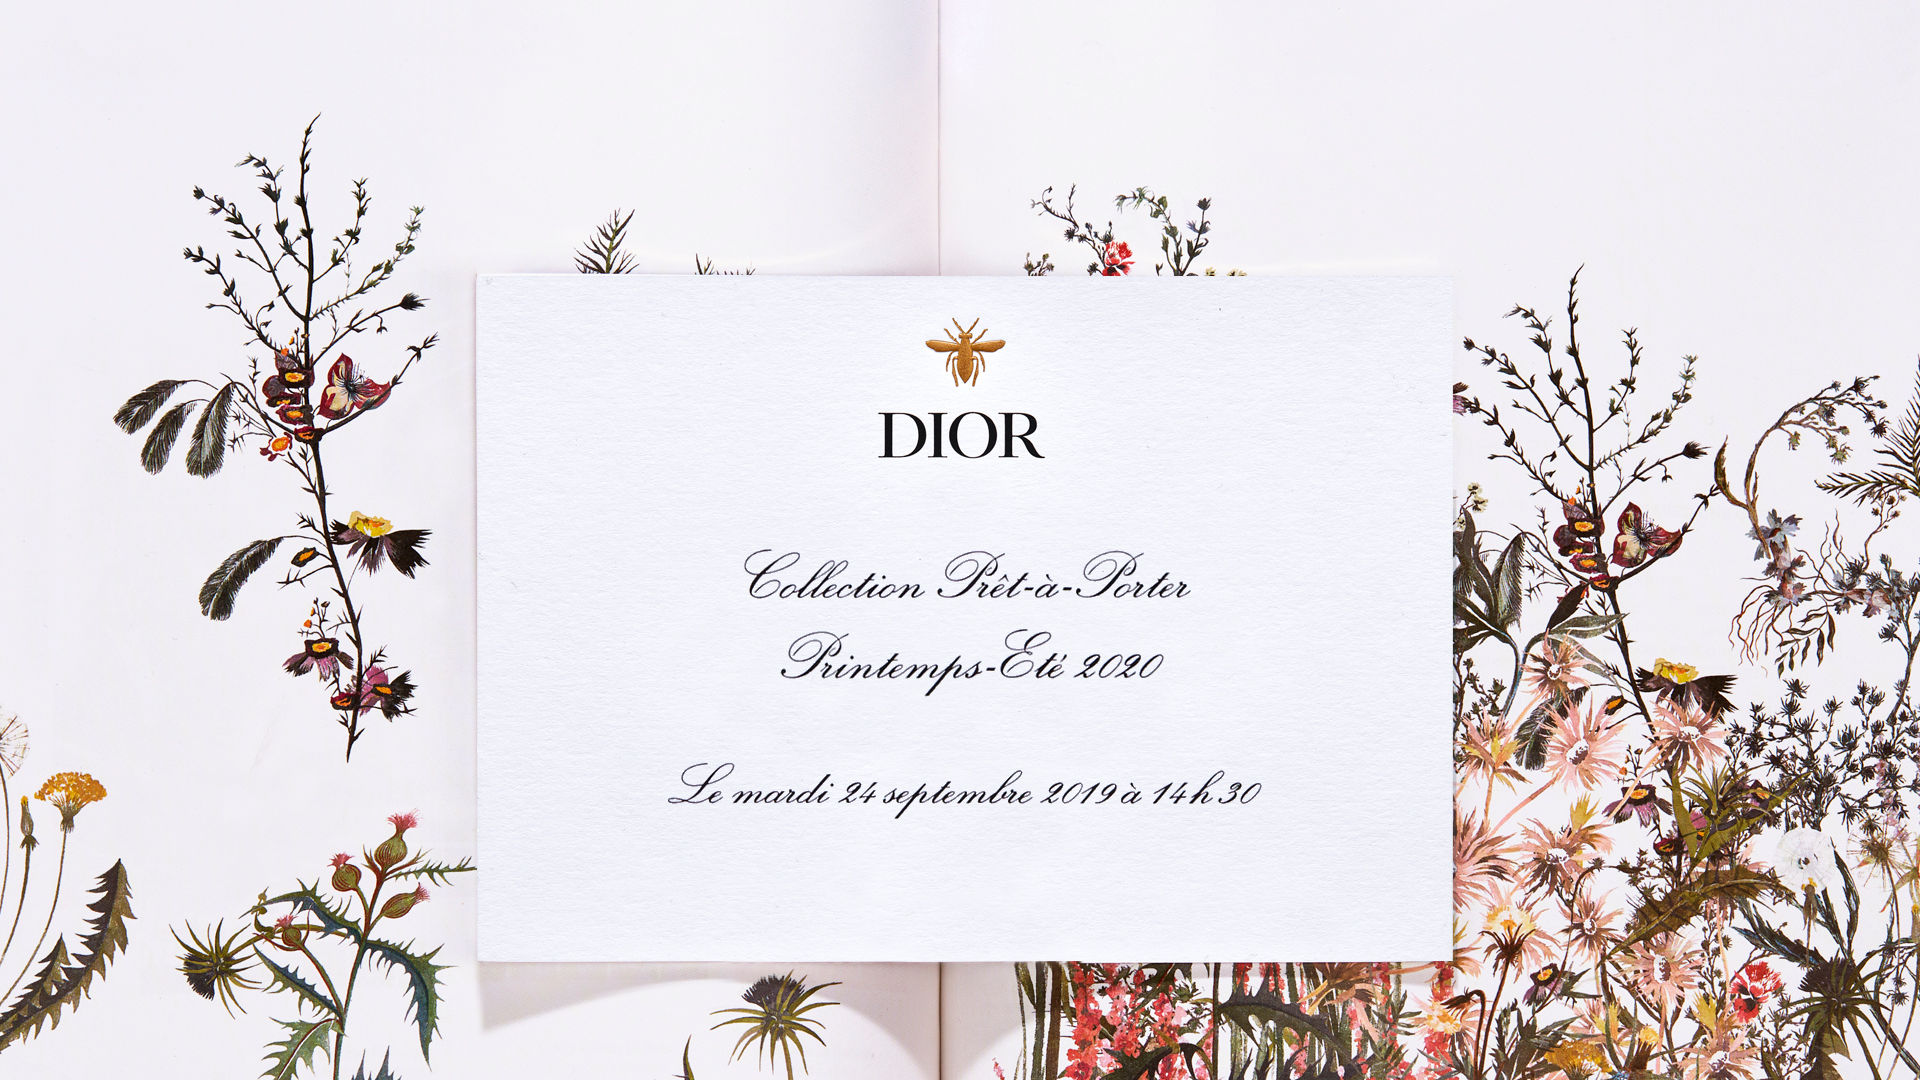 Livestream: Front Row at Dior’s Spring/Summer 2020 Show